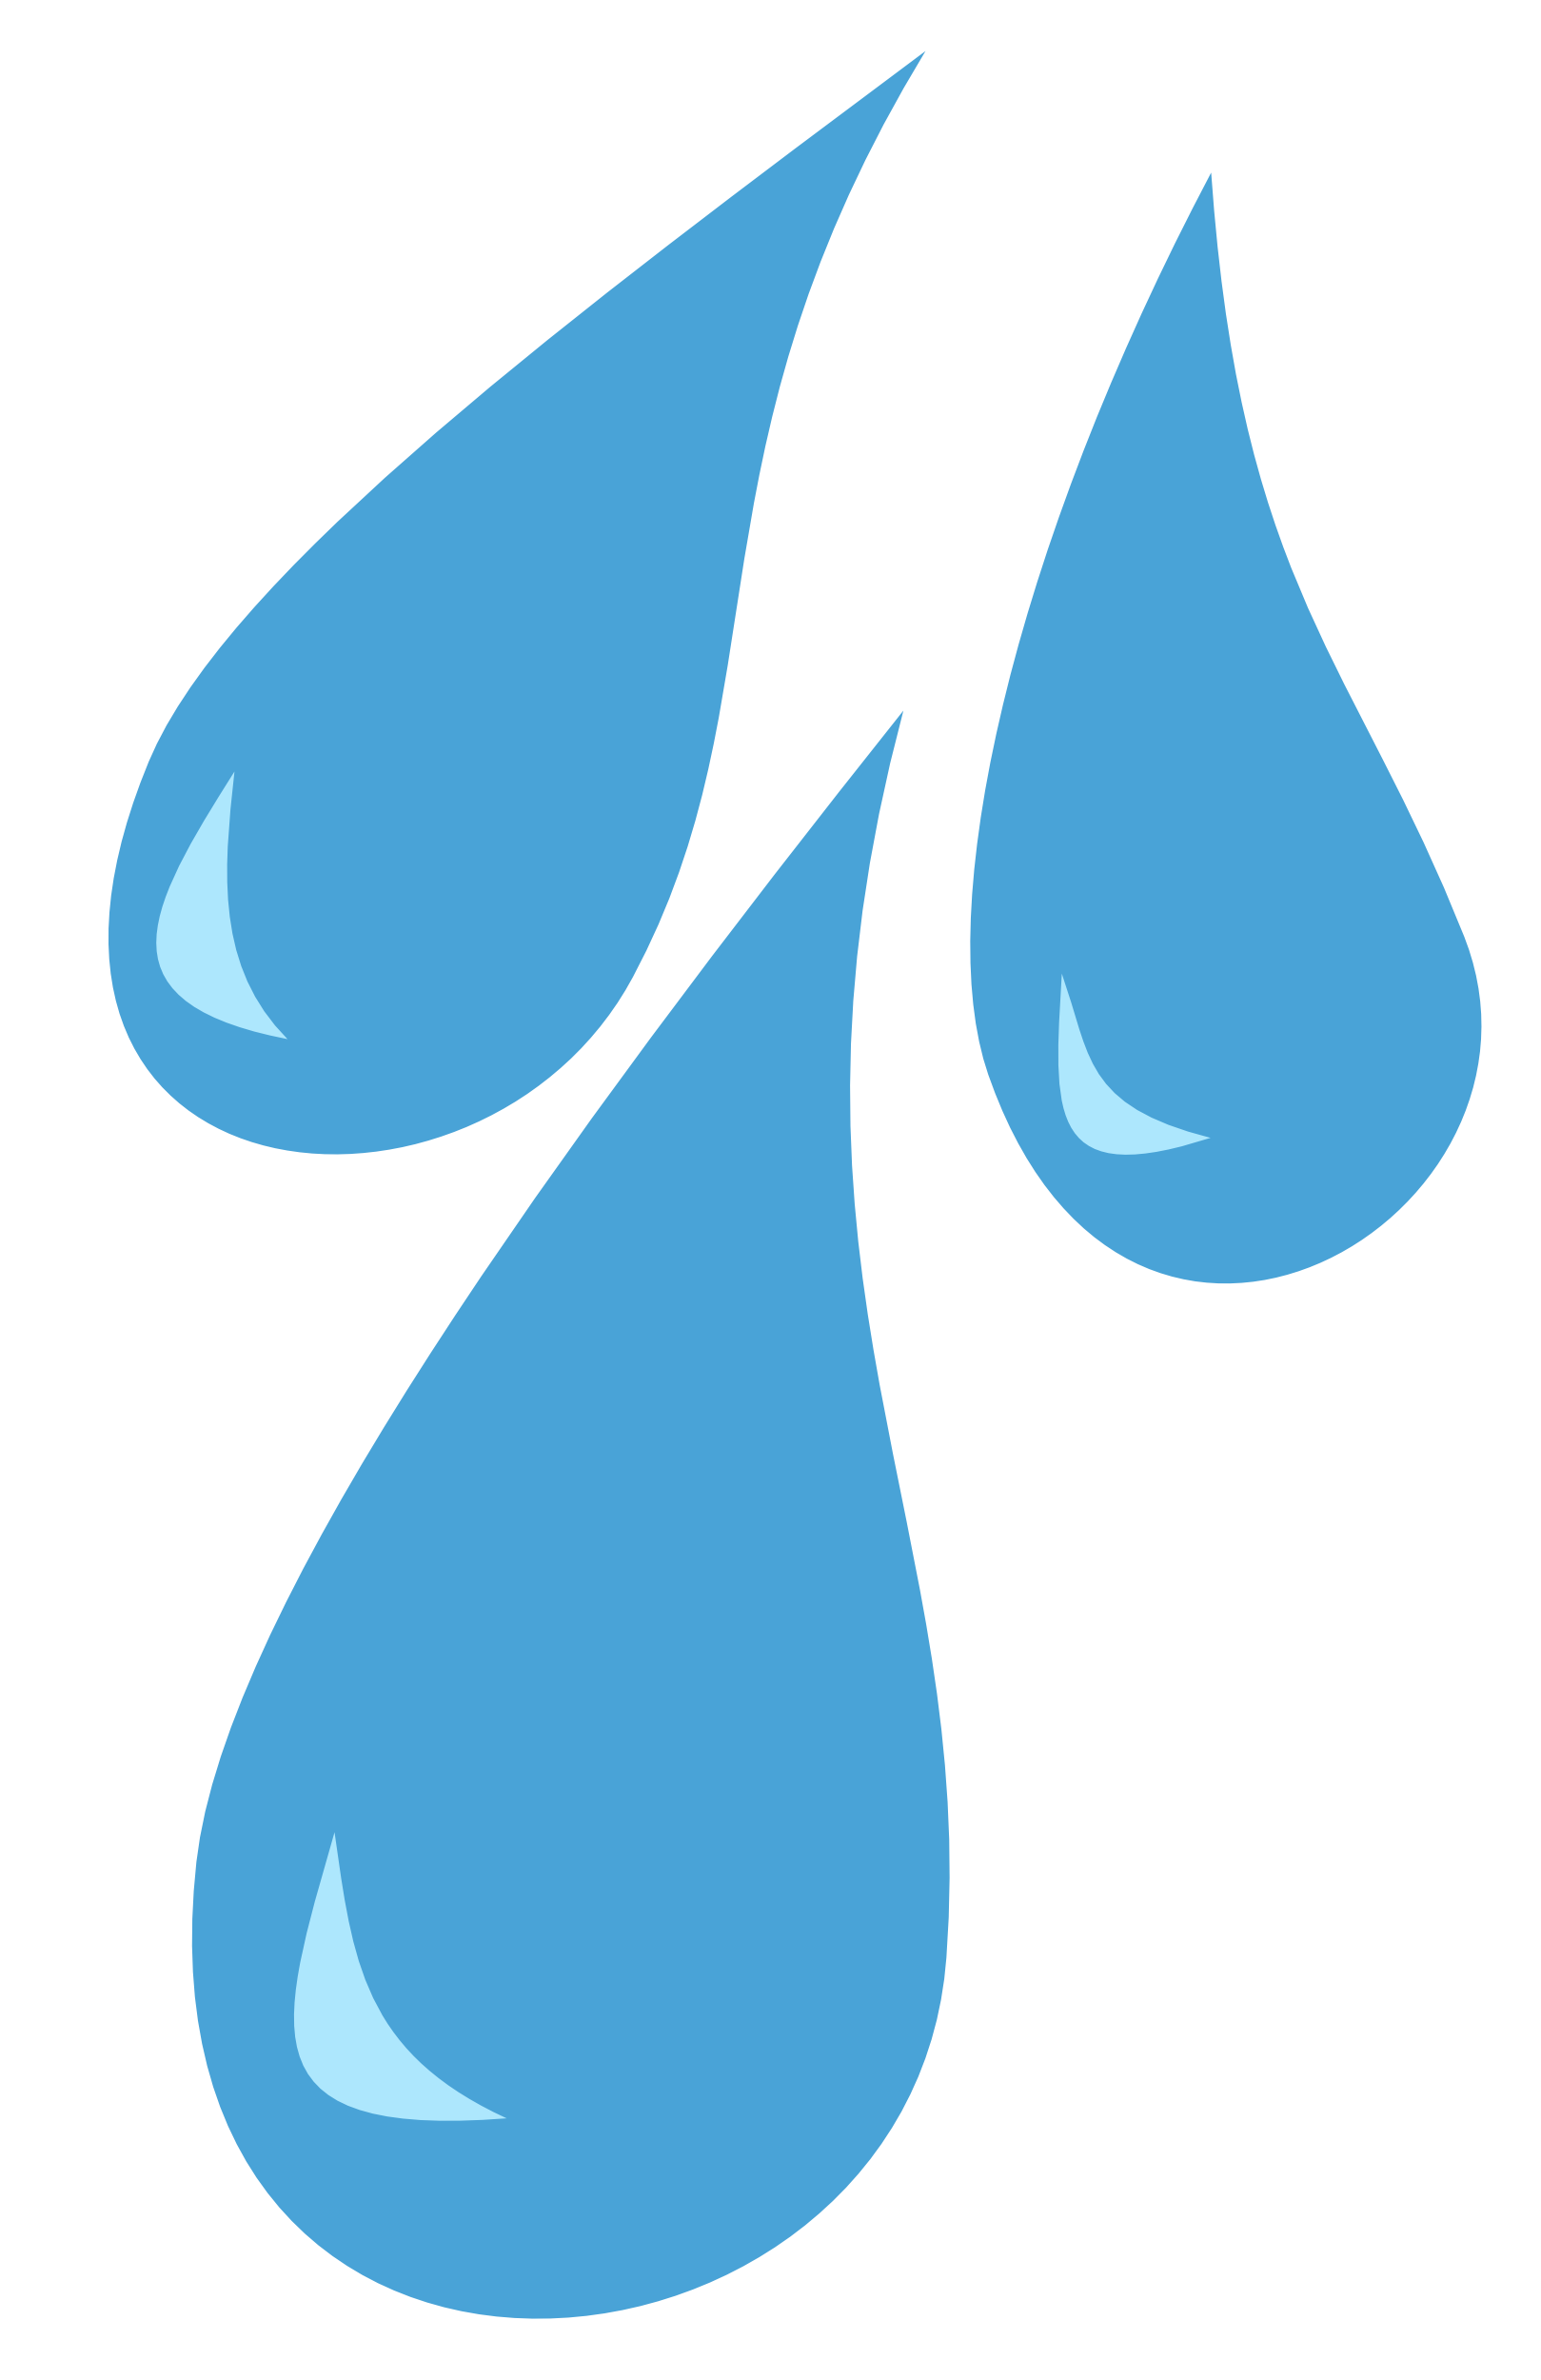 Raindrops cutie mark by The-Smiling-Pony on Clipart library